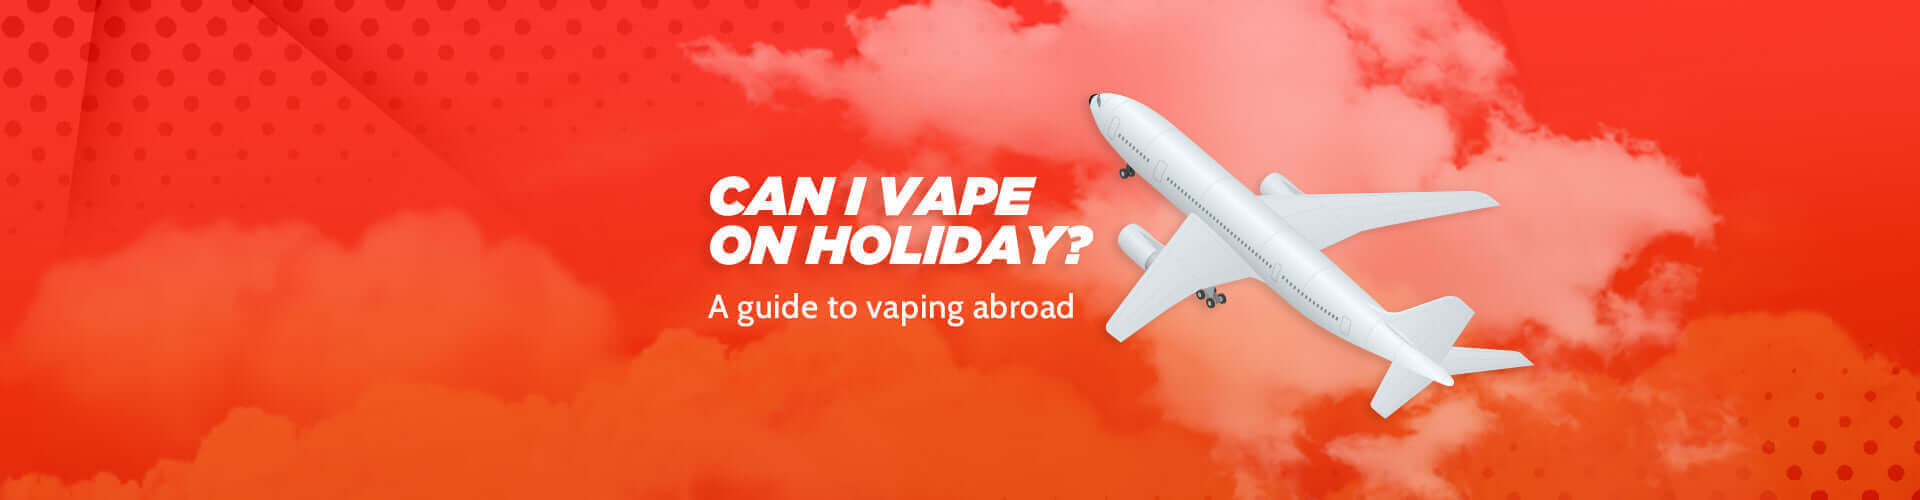 Can I vape on holiday? A guide to vaping abroad - 888 Vapour